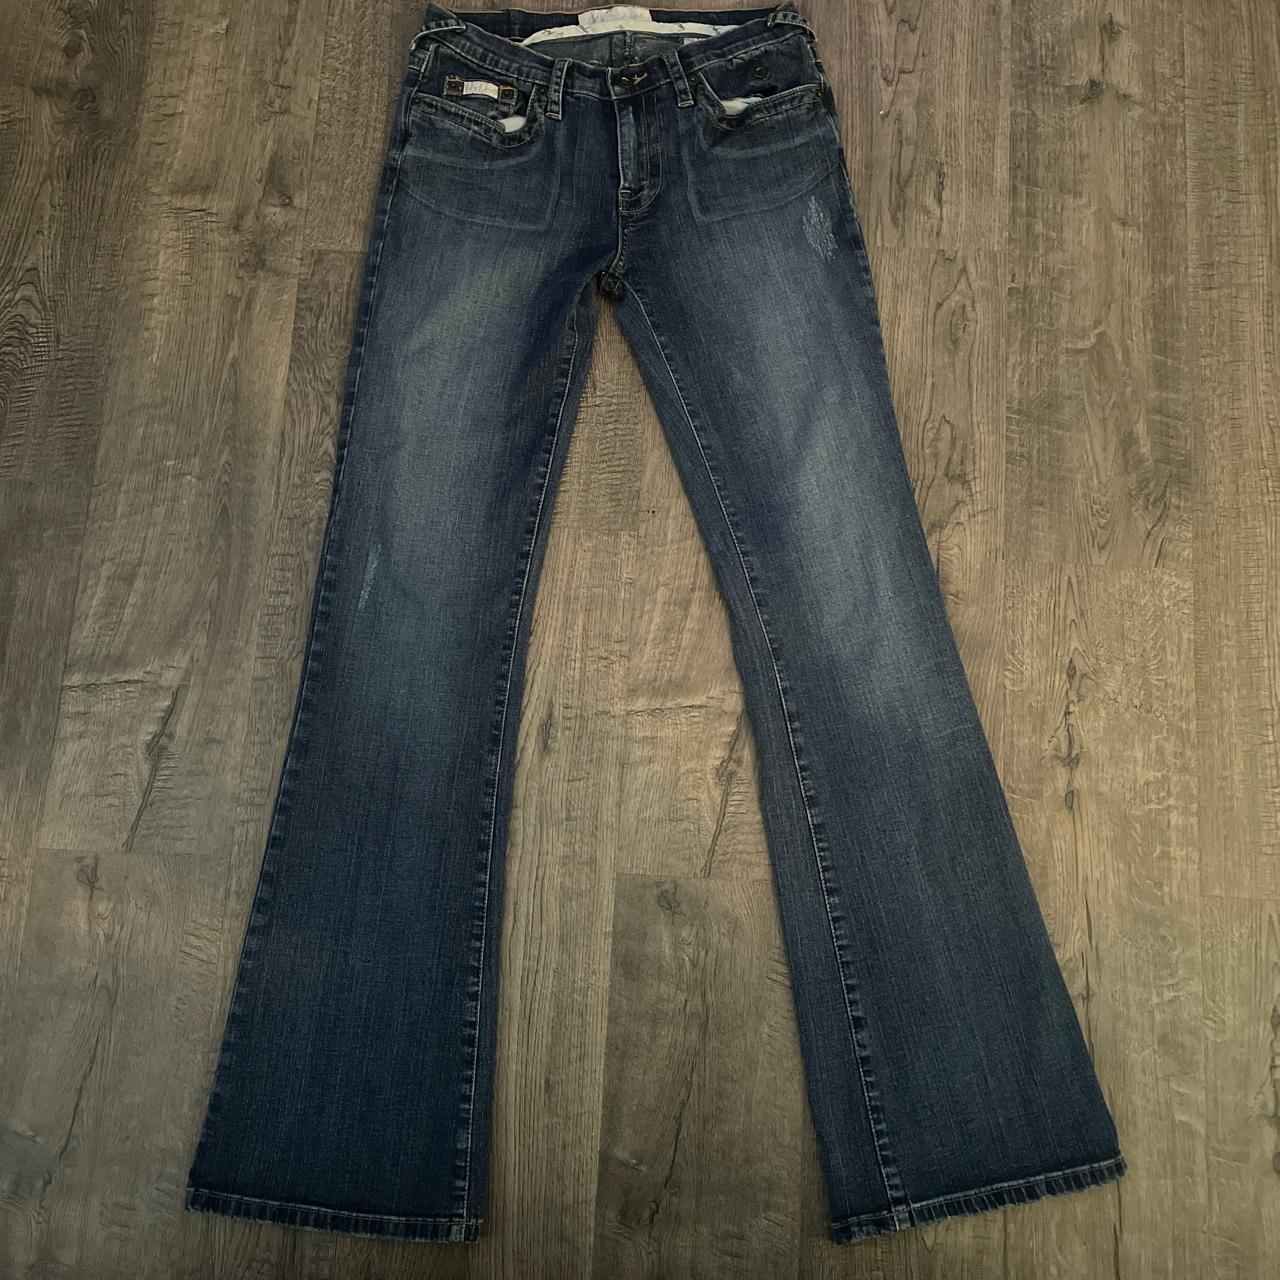 Authentic Baby Phat Jeans 😻 Size... - Depop